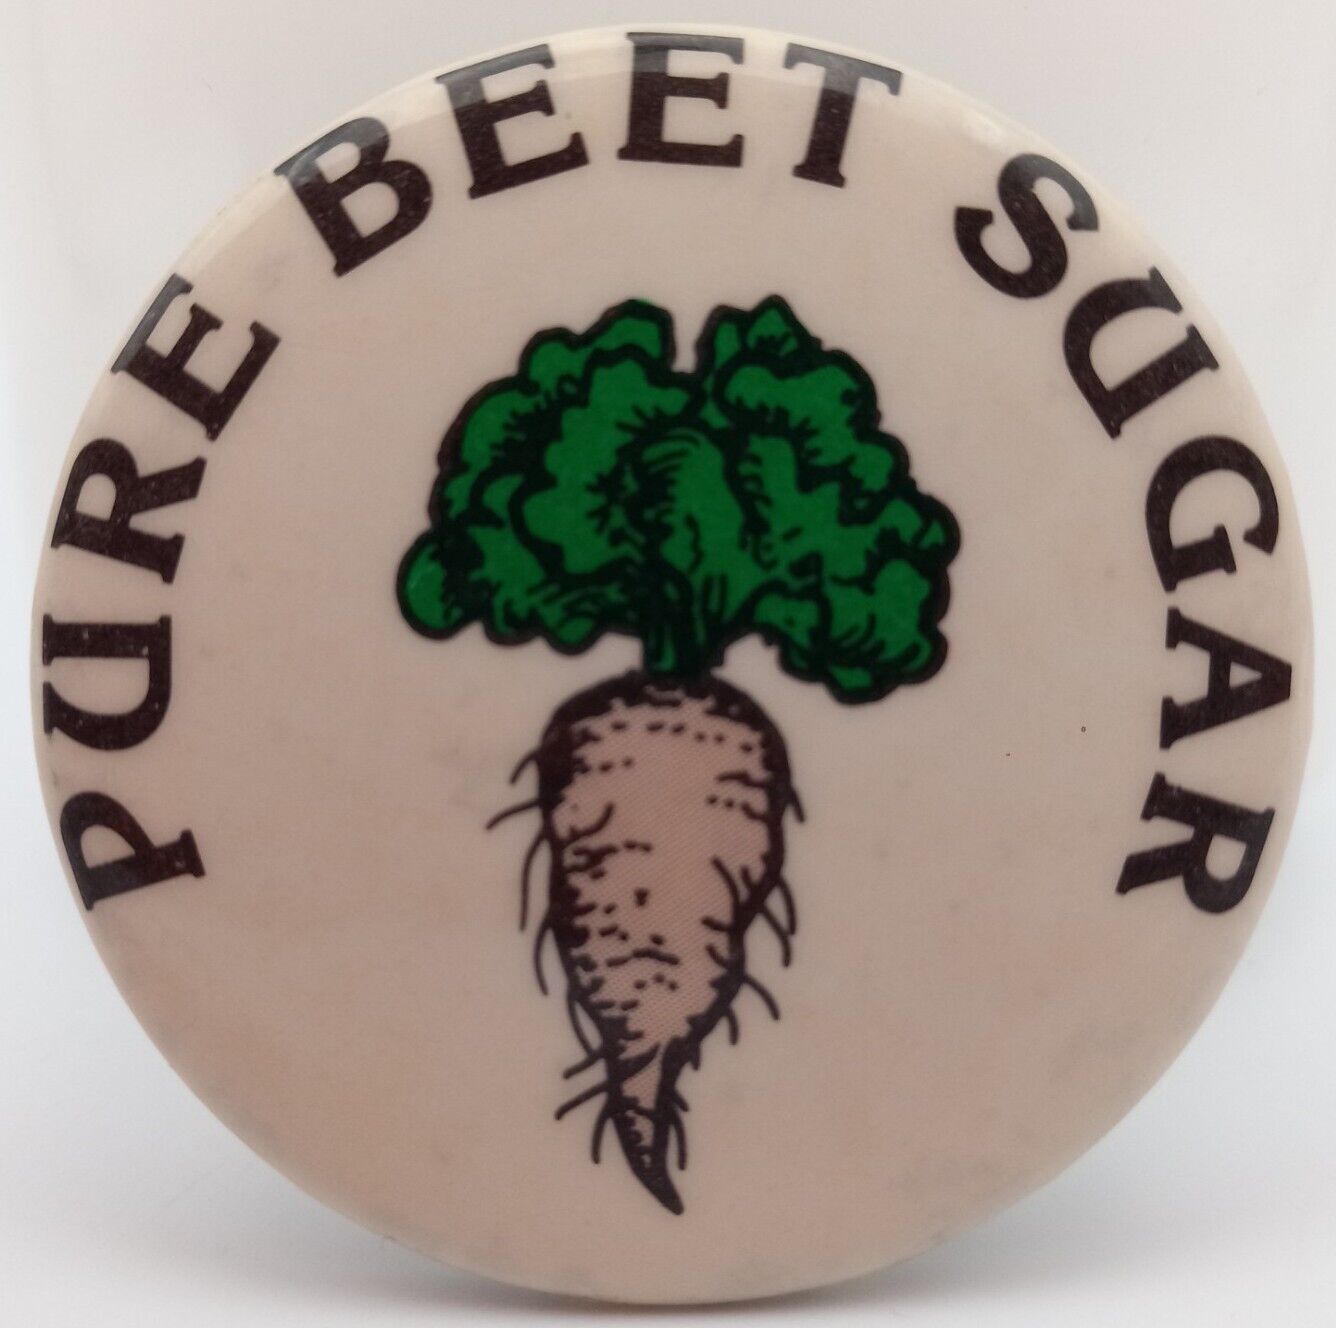 Vintage Pure Beet Sugar Pinback Button Advertising Agriculture Grocery Pin Badge